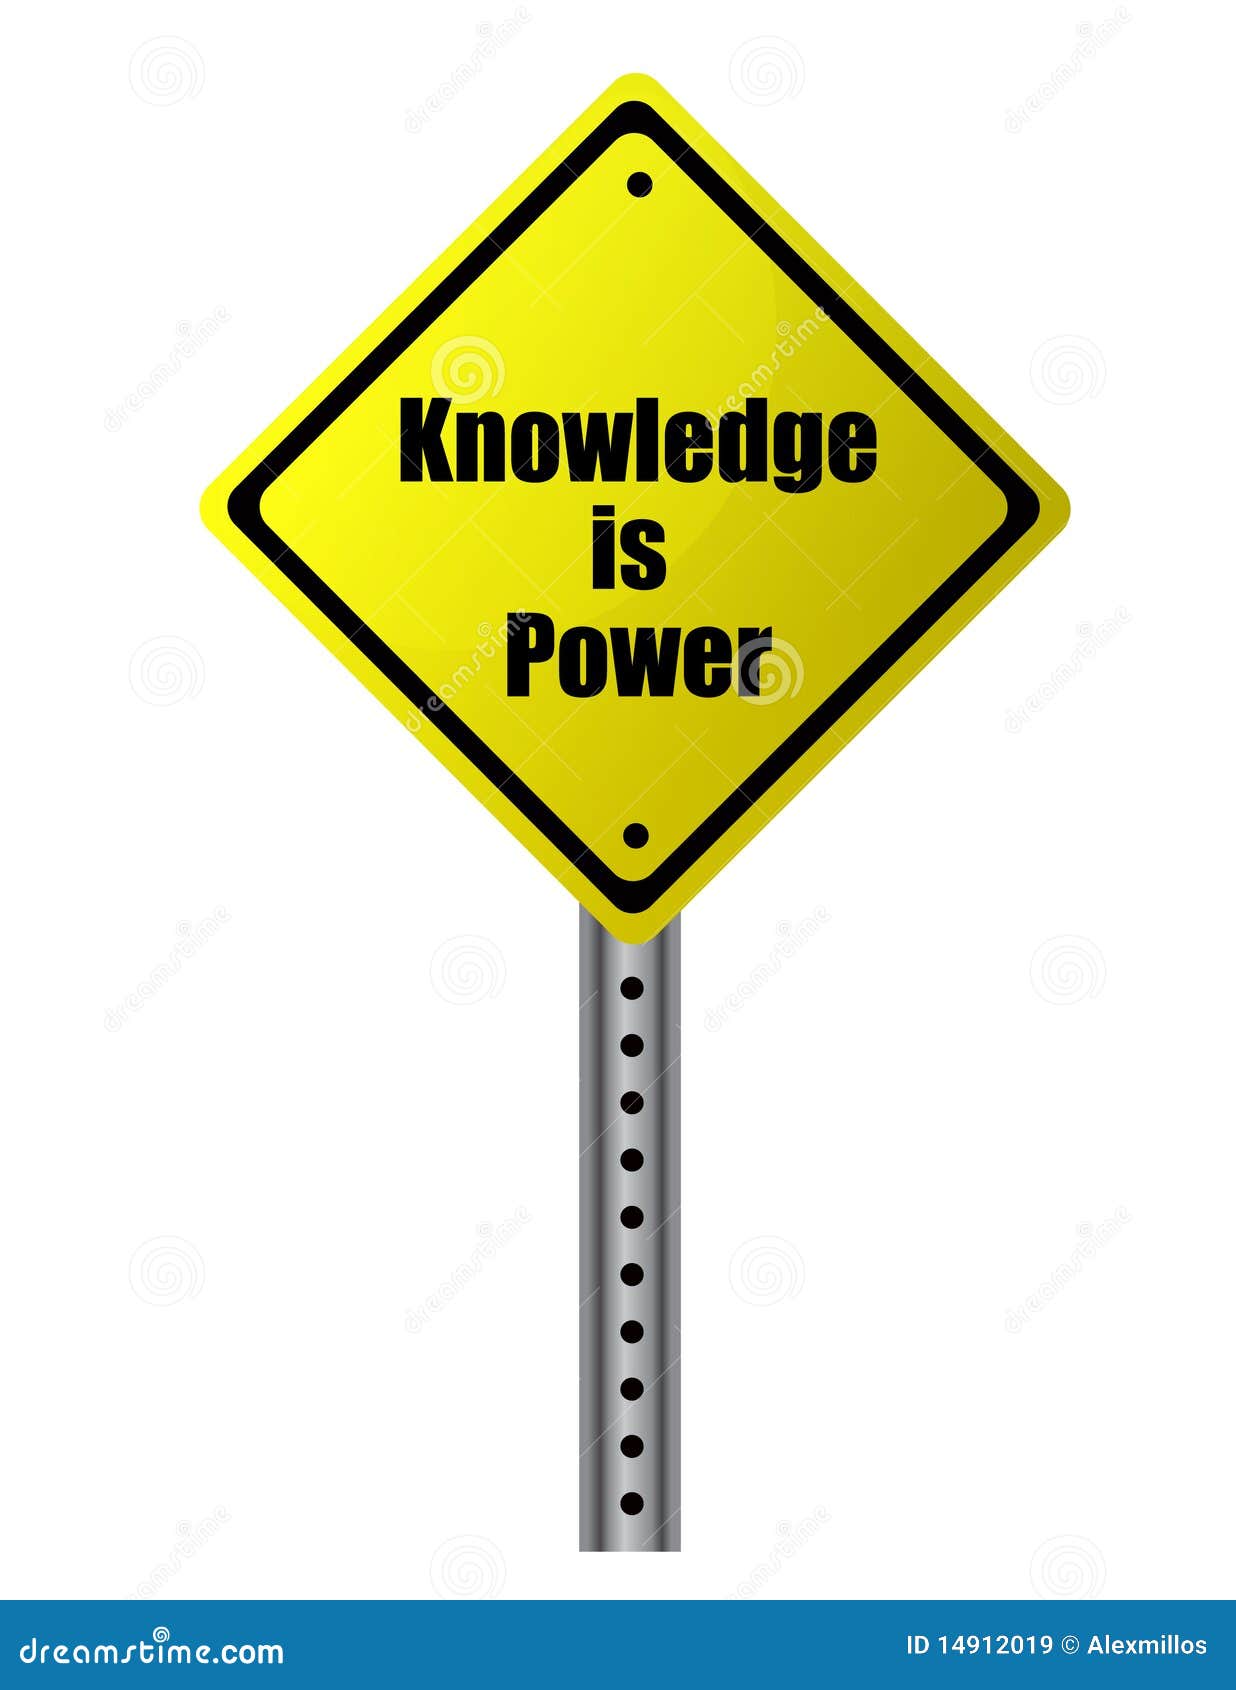 clipart on knowledge - photo #49